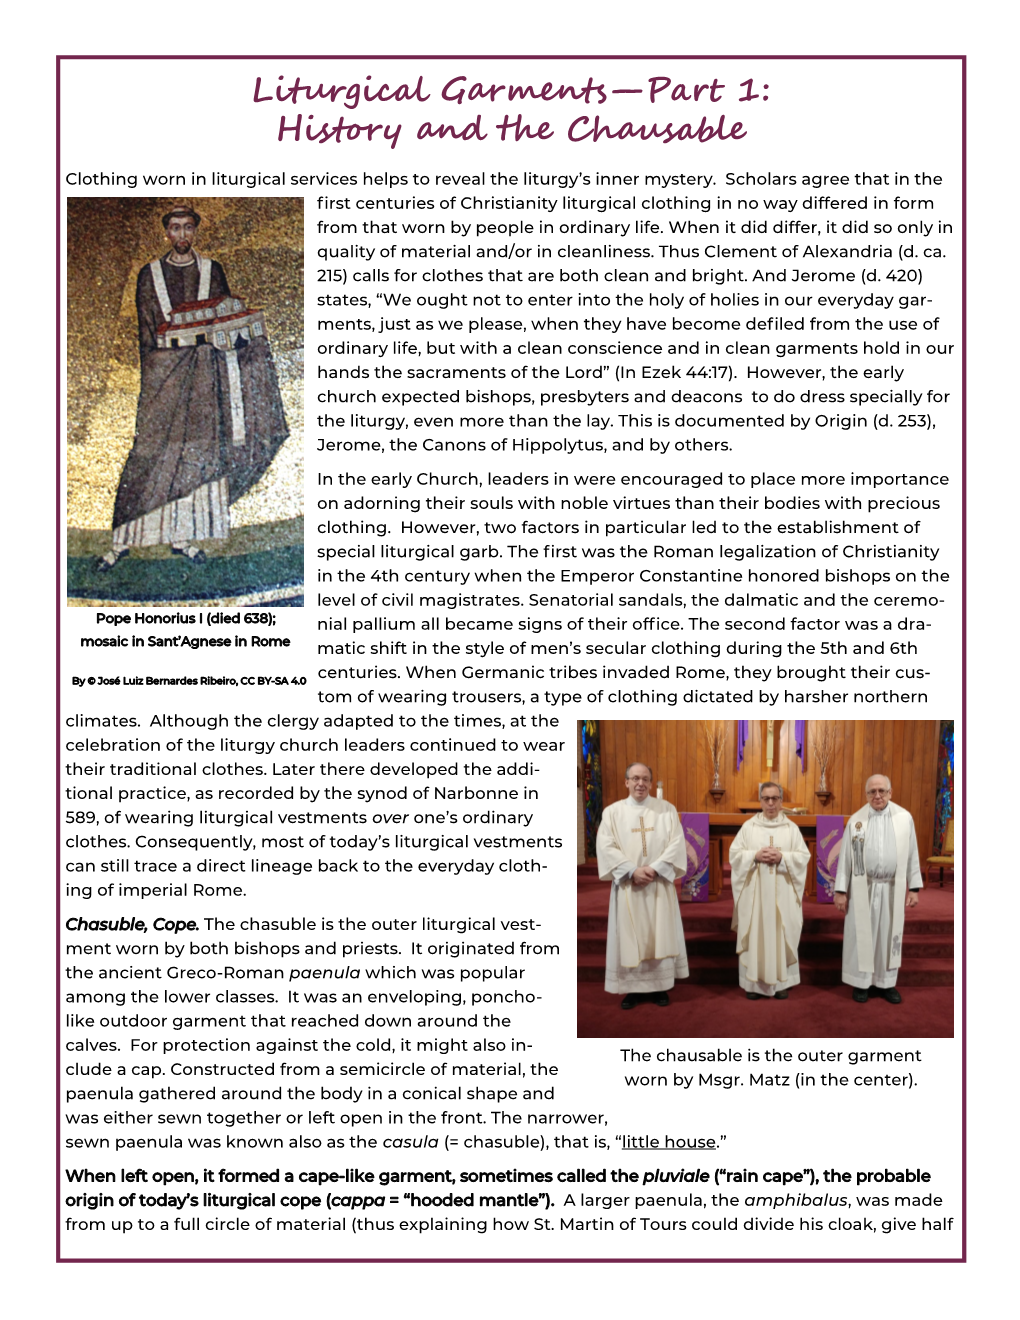 Liturgical Garments—Part 1: History and the Chausable